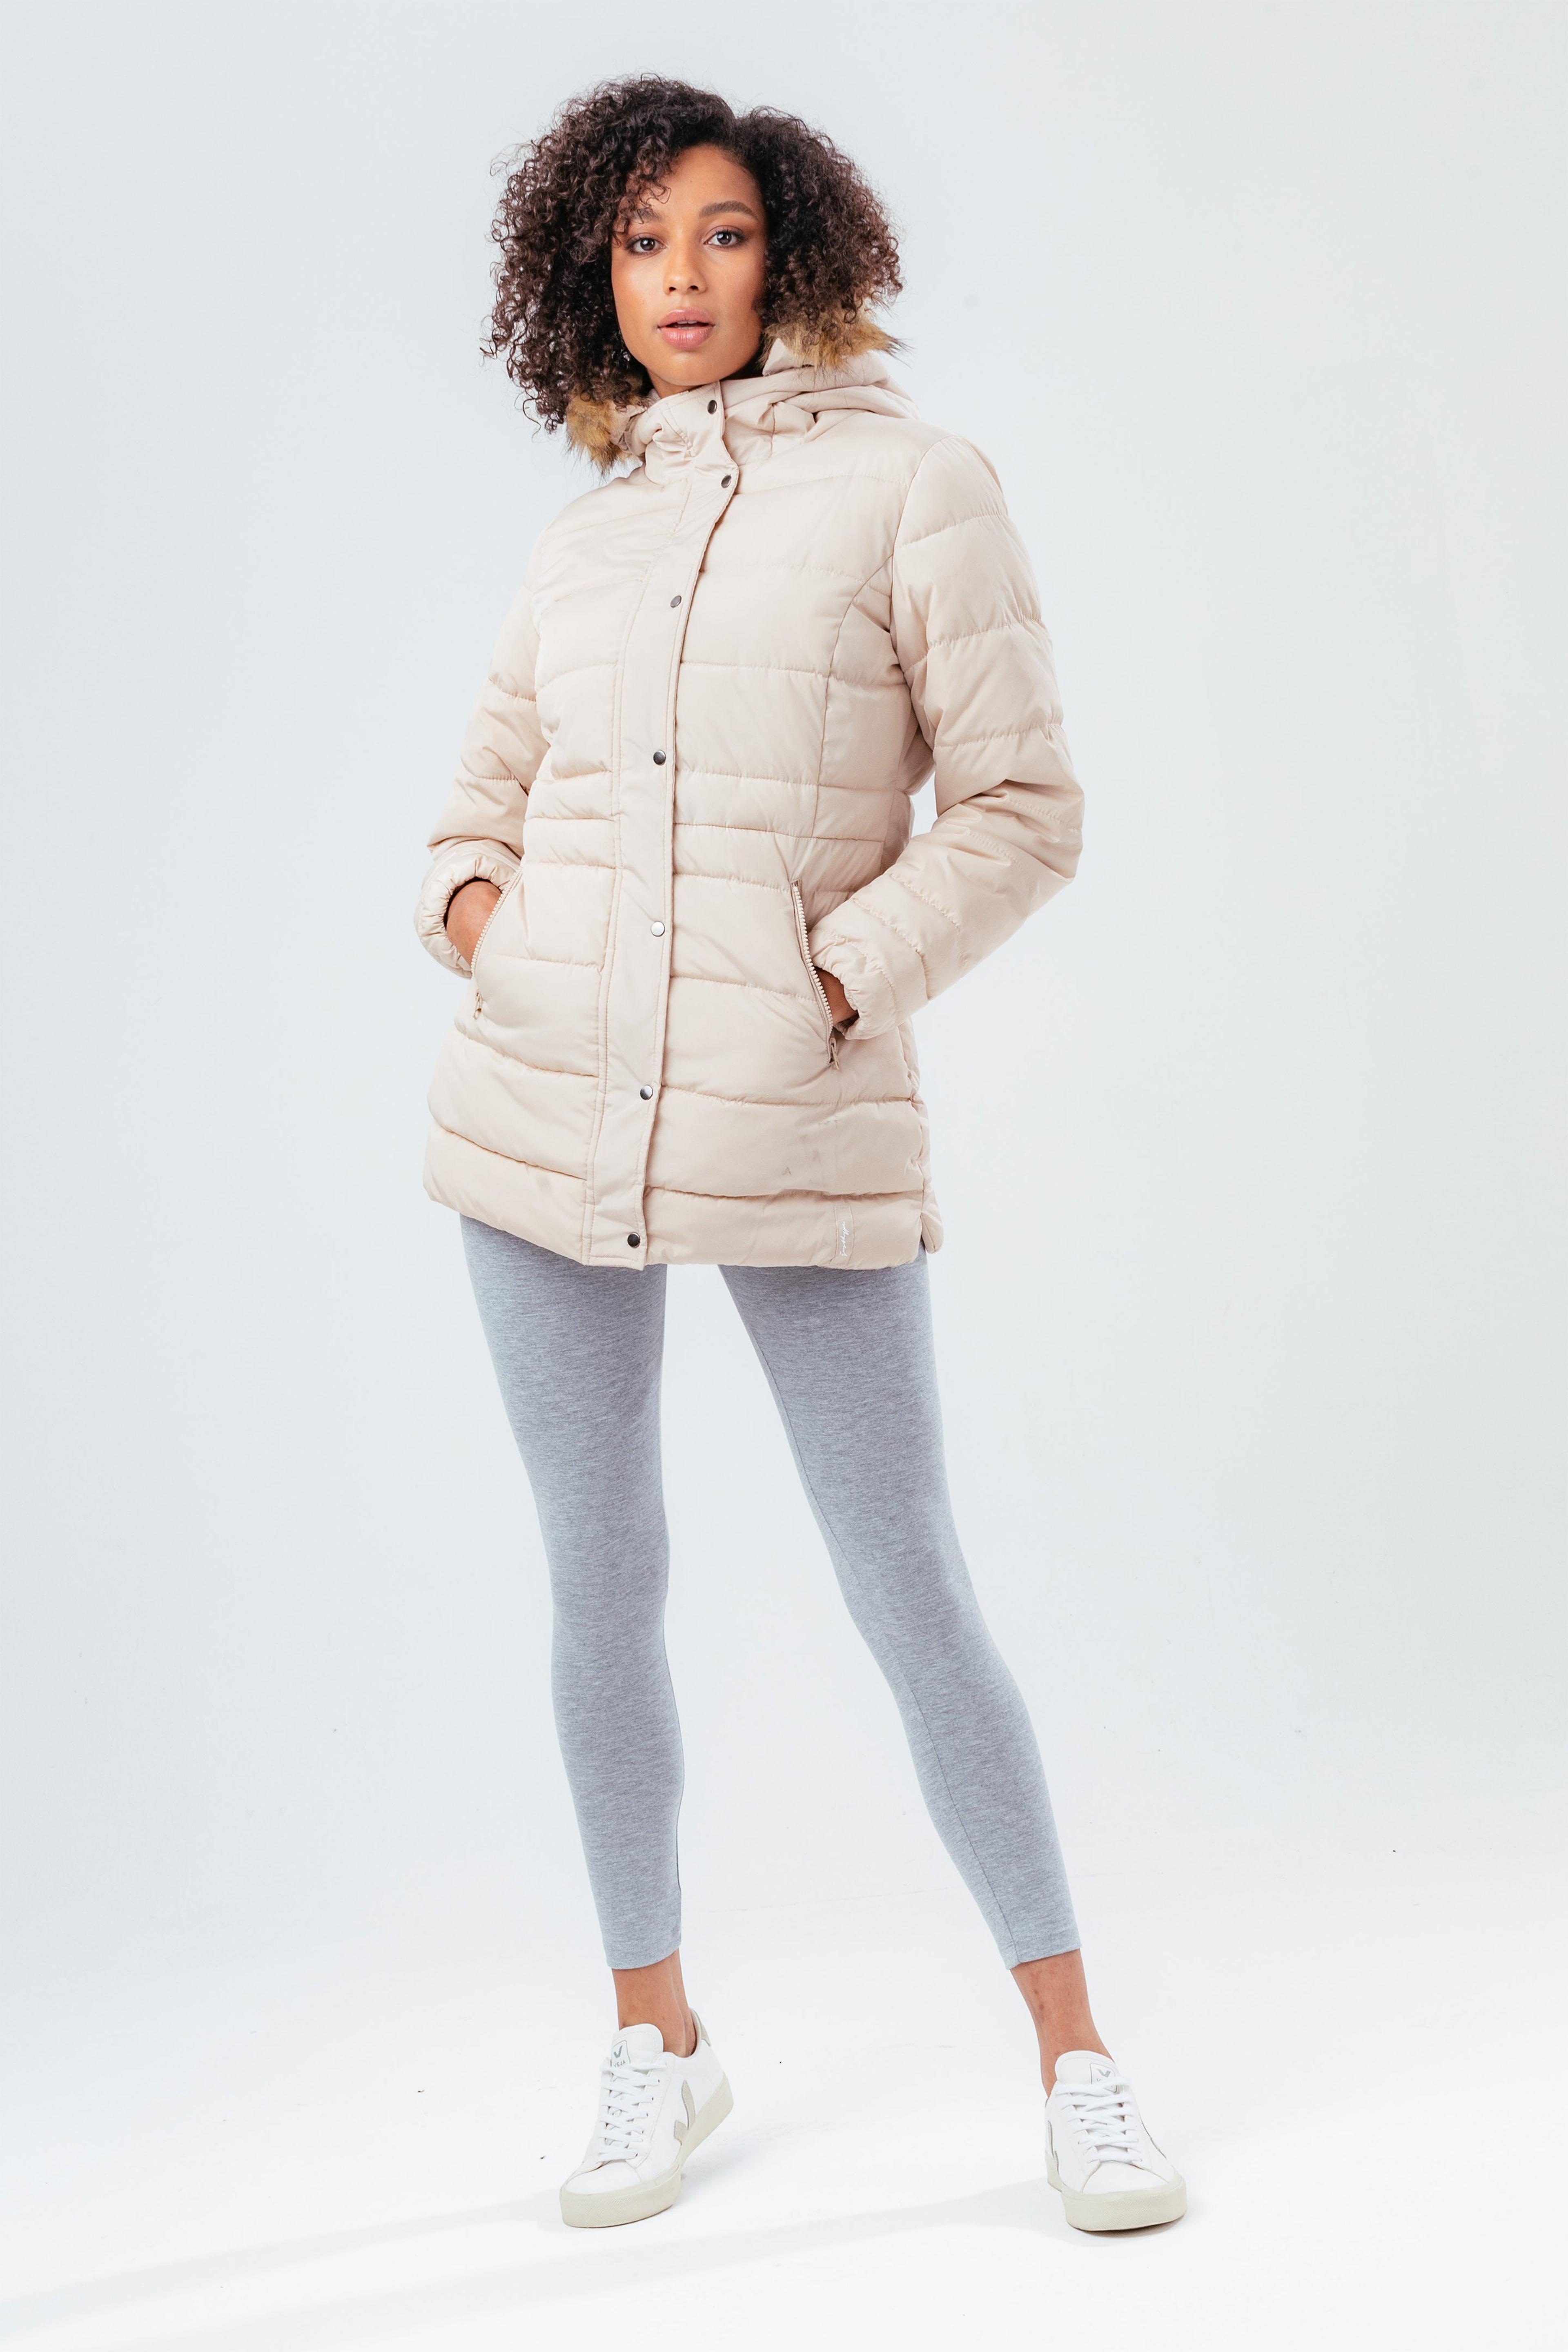 Alternate View 1 of HYPE BEIGE MID LENGTH WOMEN'S PADDED COAT WITH FUR